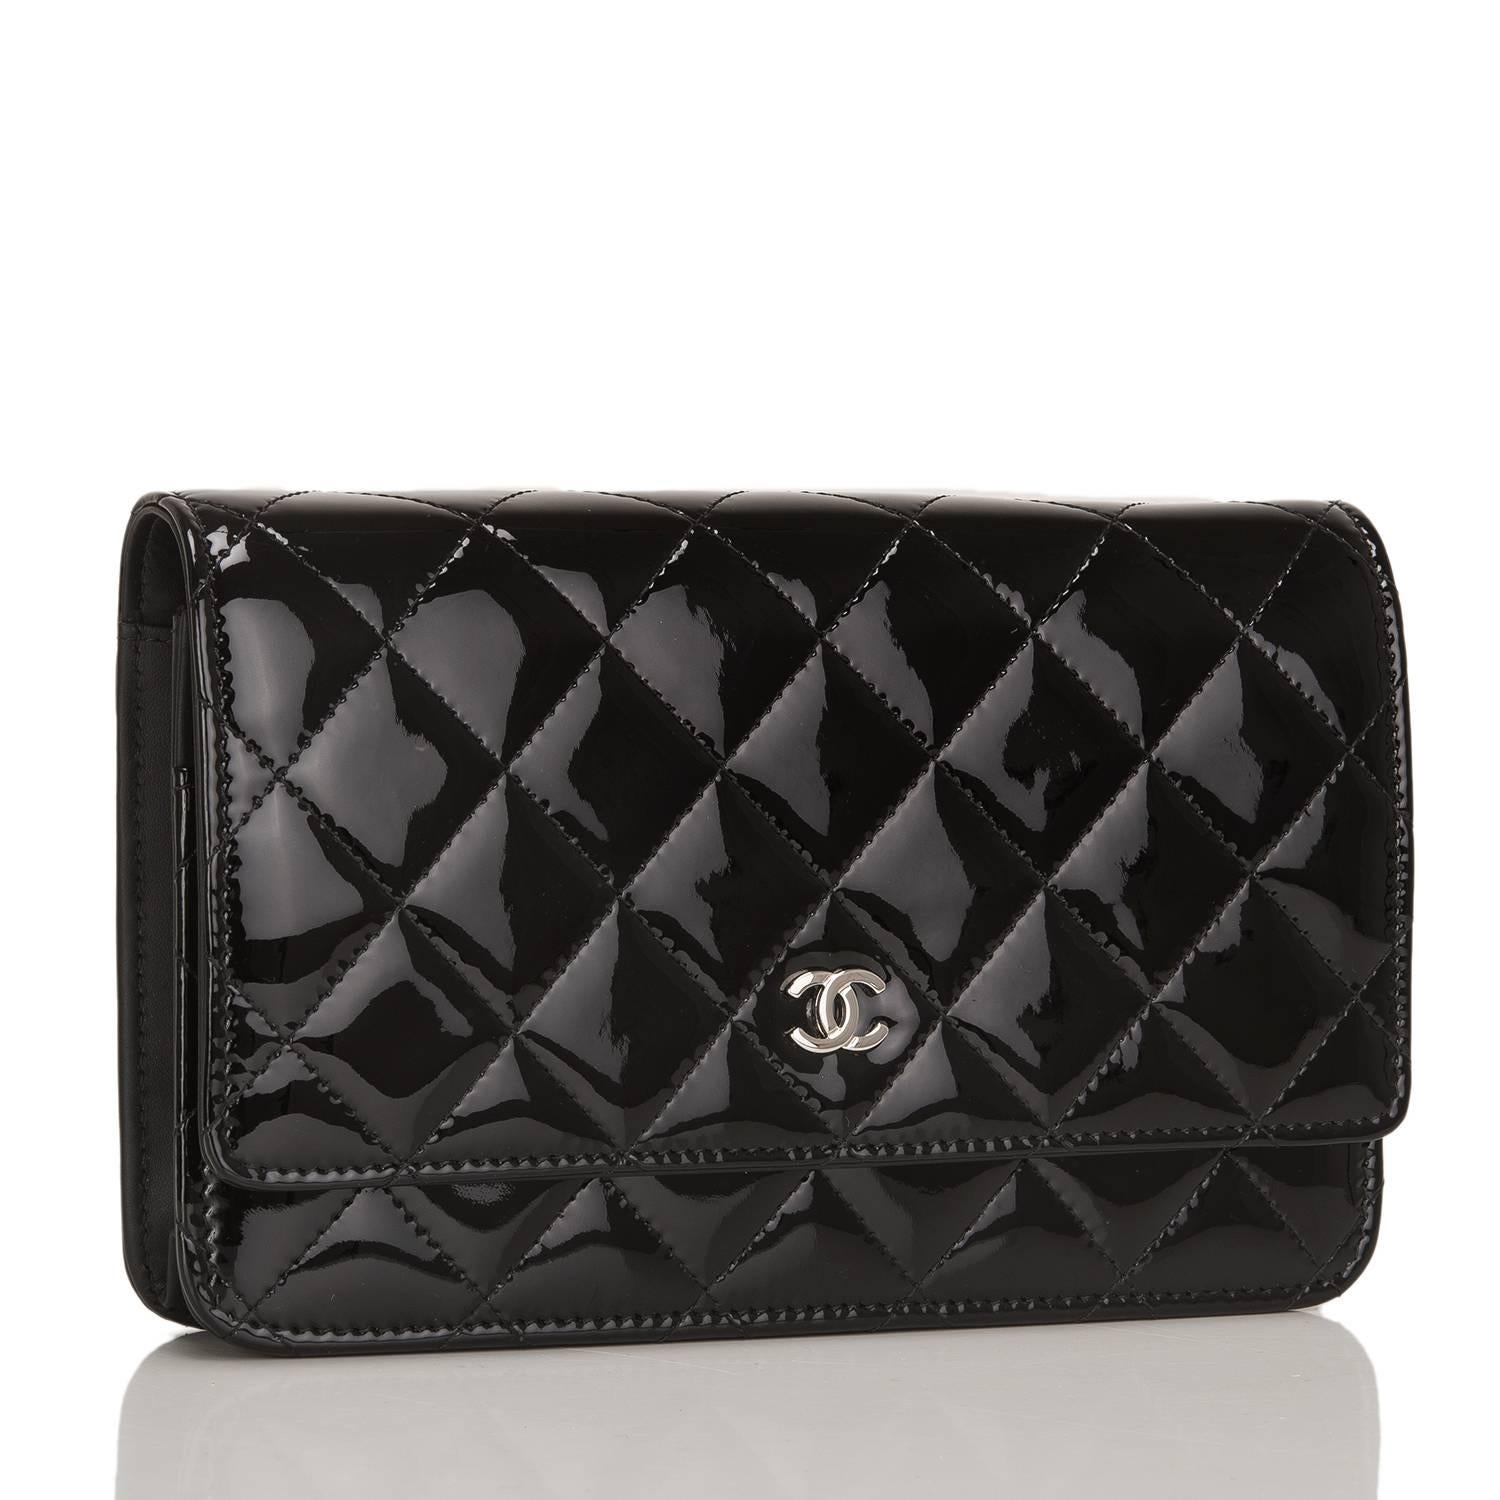  	
This Chanel Wallet On Chain is made of black patent leather and accented with silver tone hardware.

The bag features a front flap with a CC charm and a hidden snap closure, signature Chanel quilting, expandable sides and bottom, a half moon